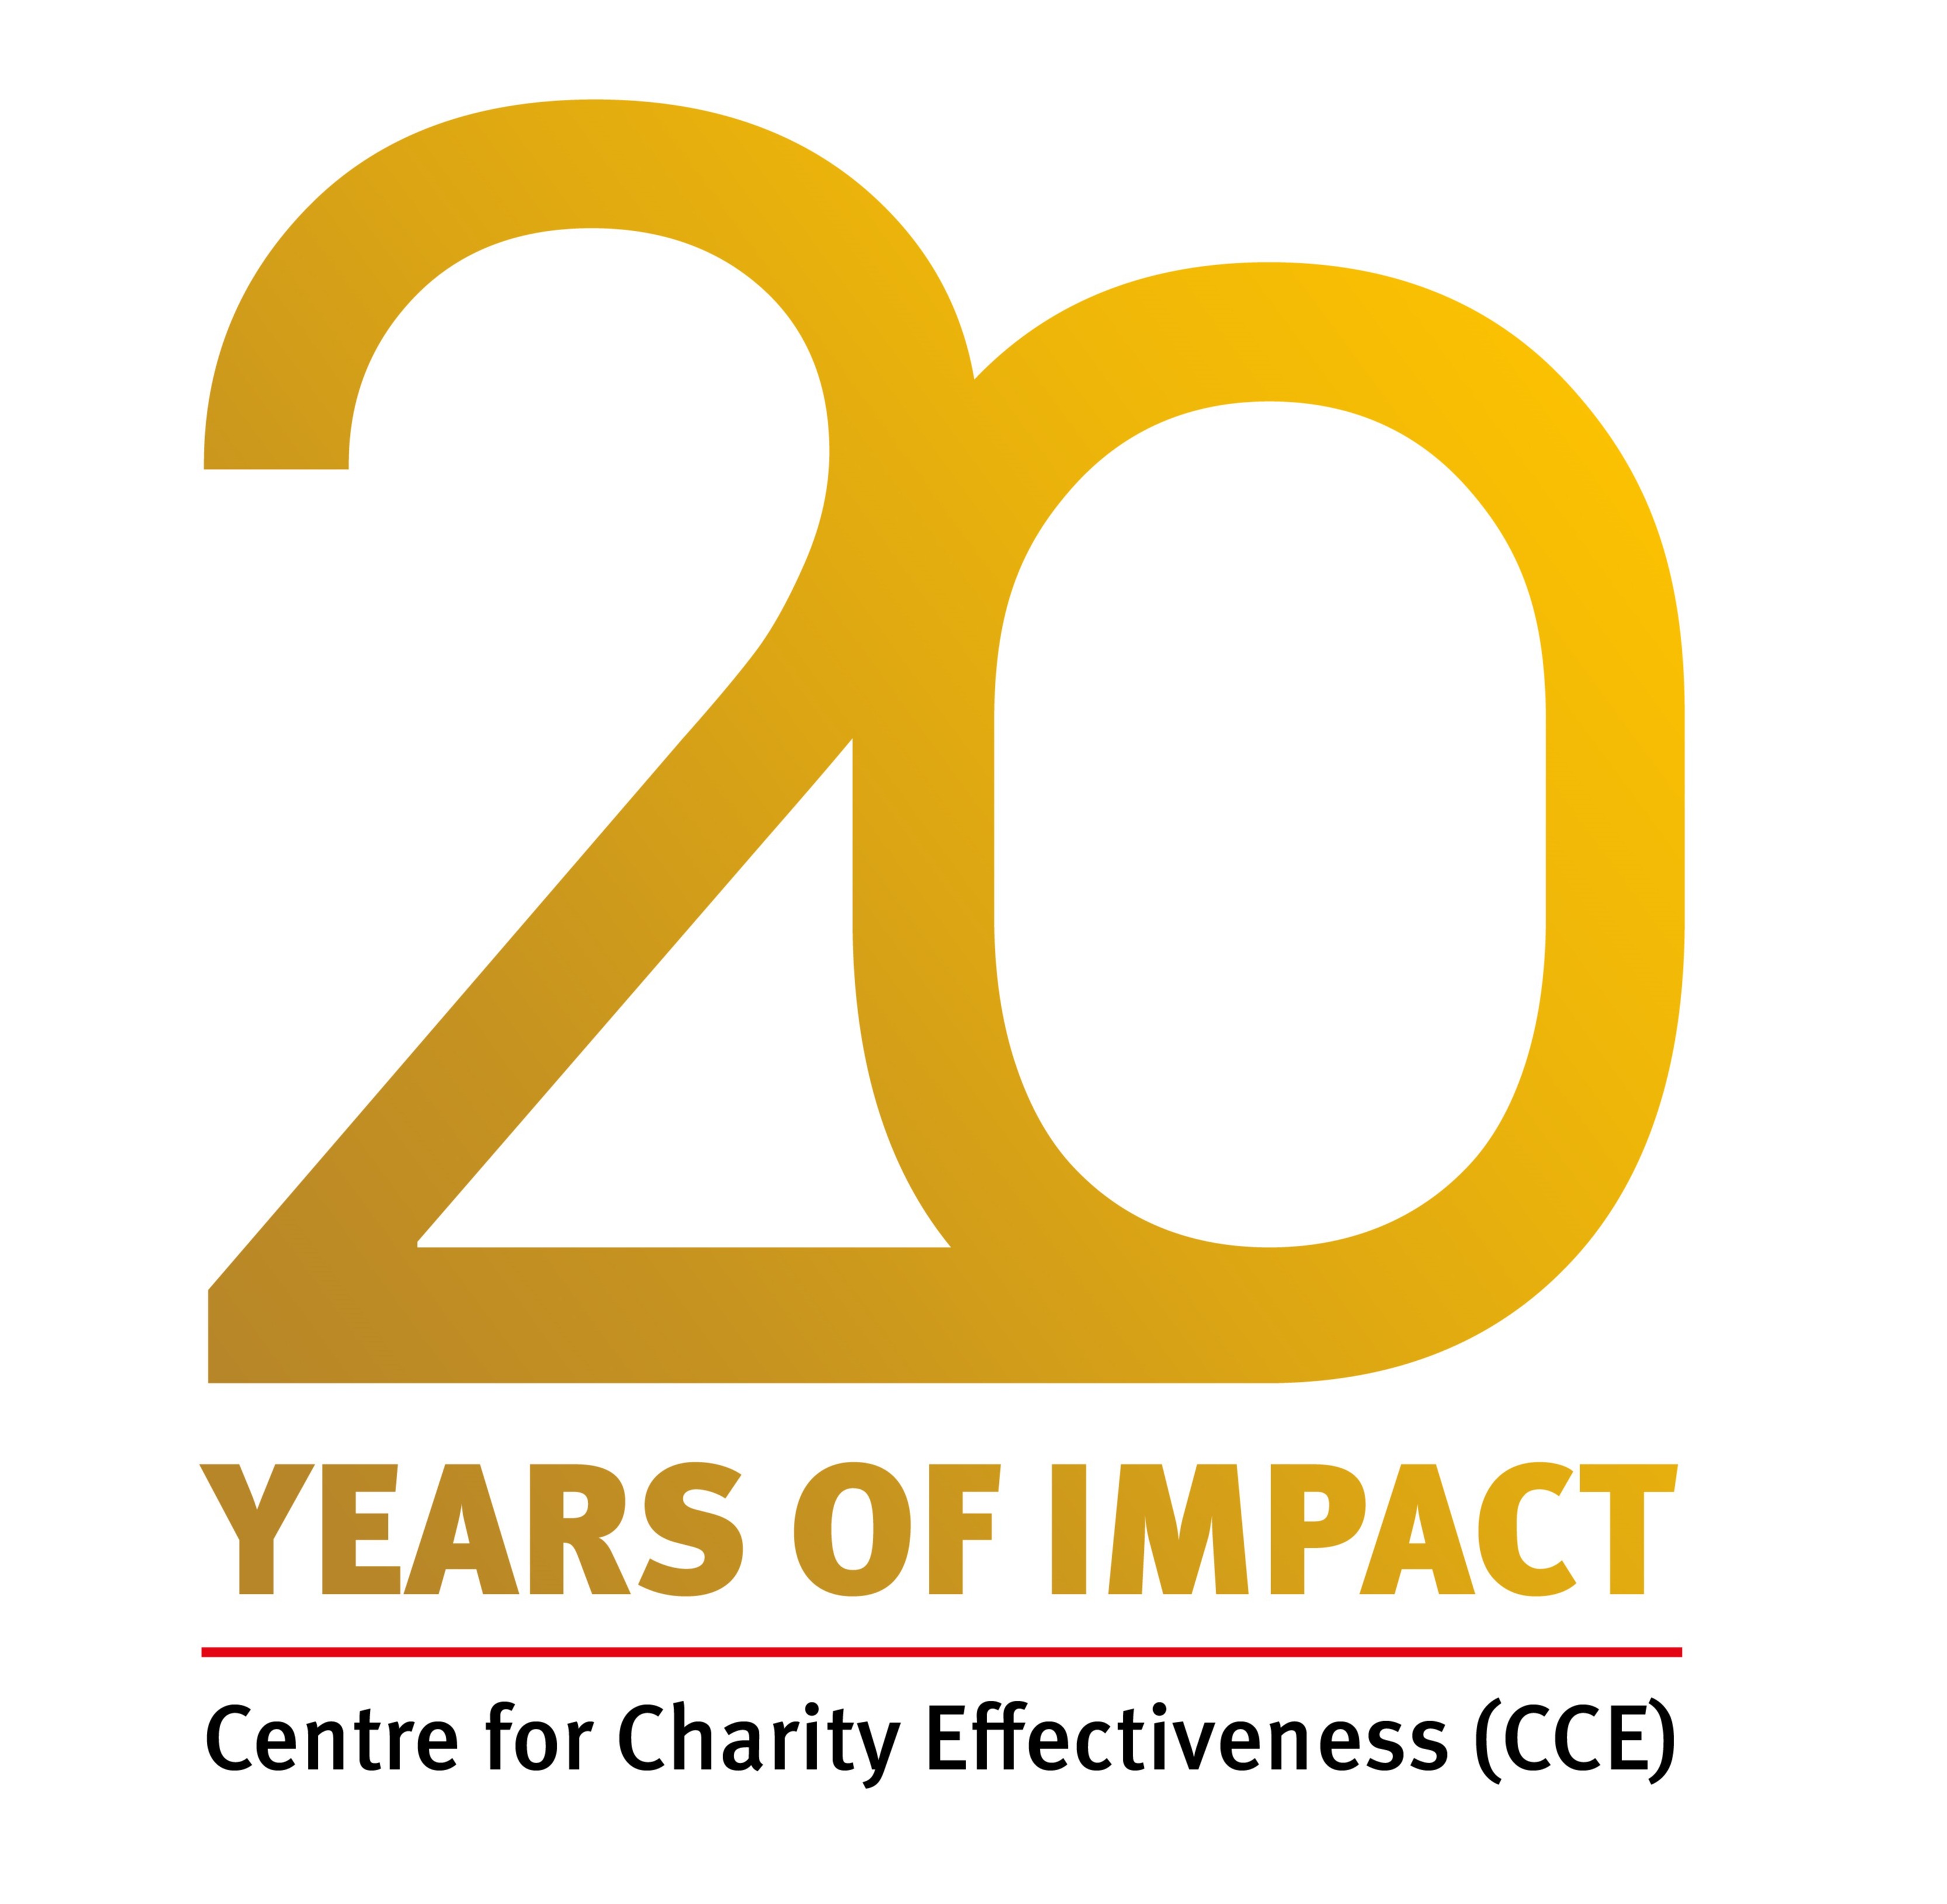 20 years of impact: Centre for Charity Effectiveness